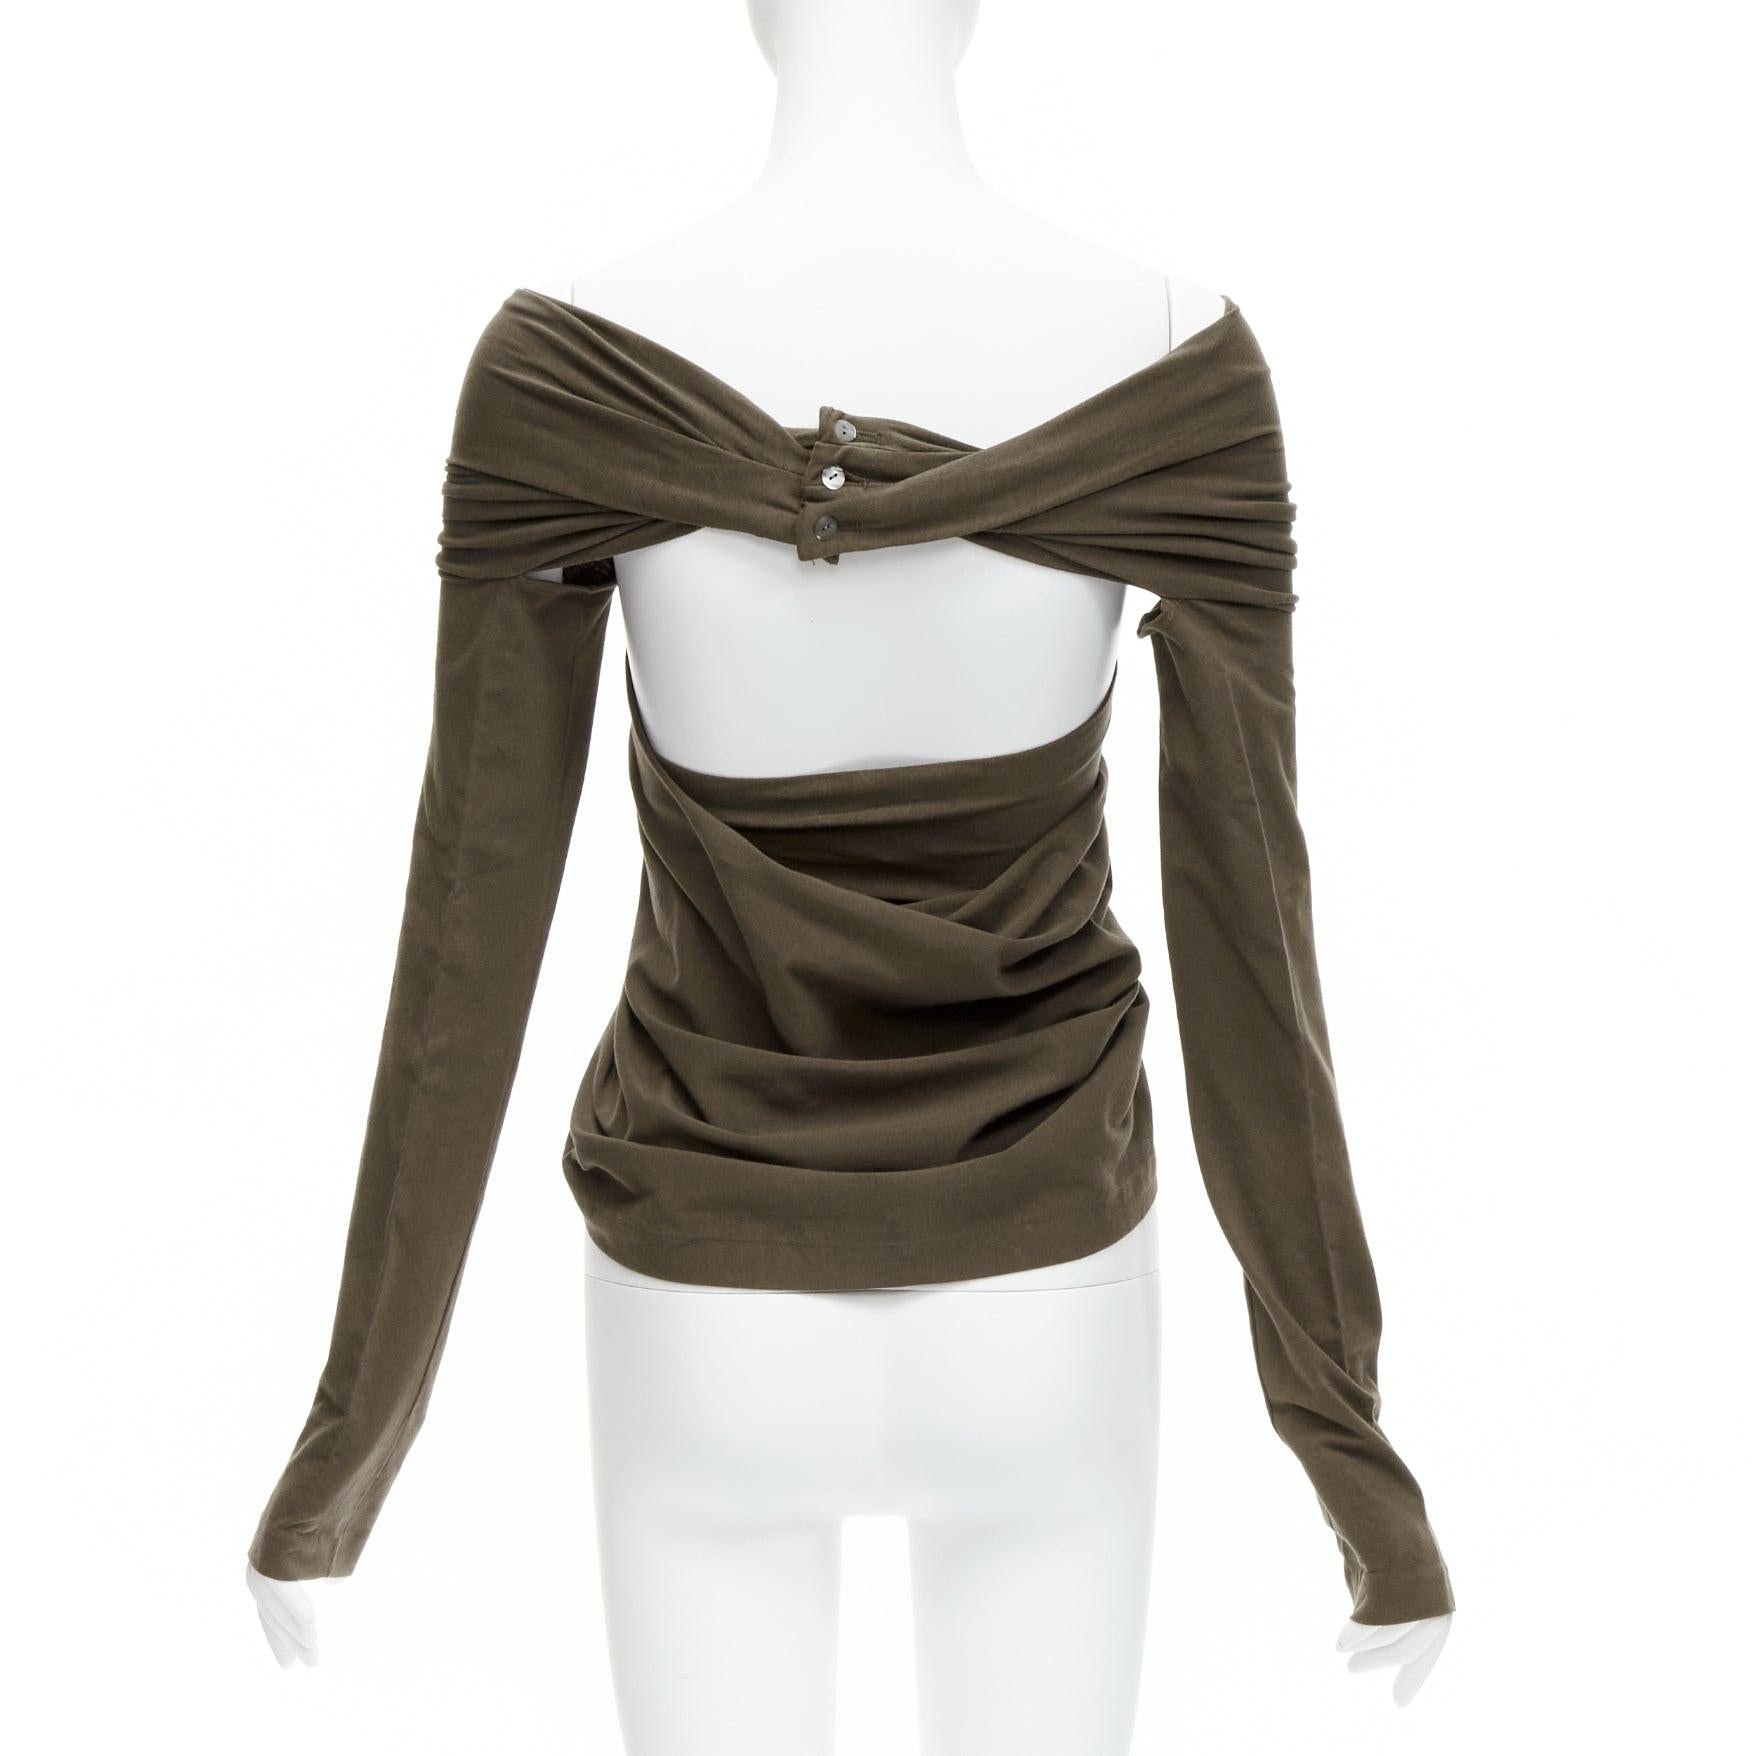 ROMEO GIGLI Vintage khaki green jersey twist off shoulder armhole cutout long sleeve top IT40 S
Reference: PYCN/A00093
Brand: Romeo Gigli
Material: Cotton, Blend
Color: Khaki
Pattern: Solid
Closure: Pullover
Made in: Italy

CONDITION:
Condition: